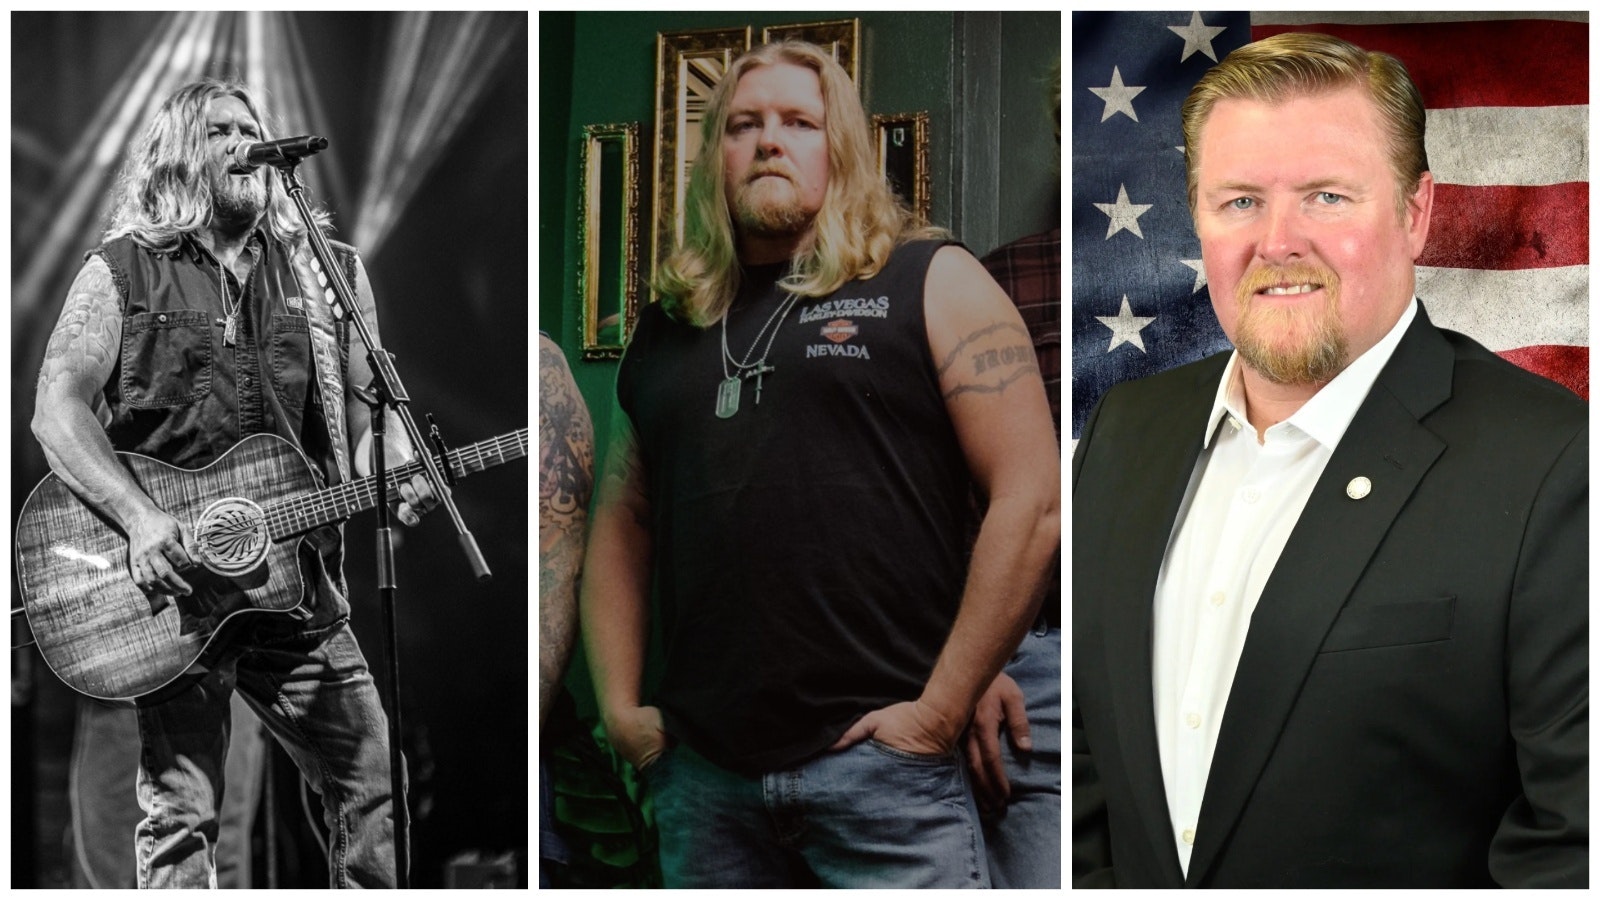 Exie Brown, lead singer of country band Southern Fried, has adopted a more conservative image for his run for hte Wyoming House.